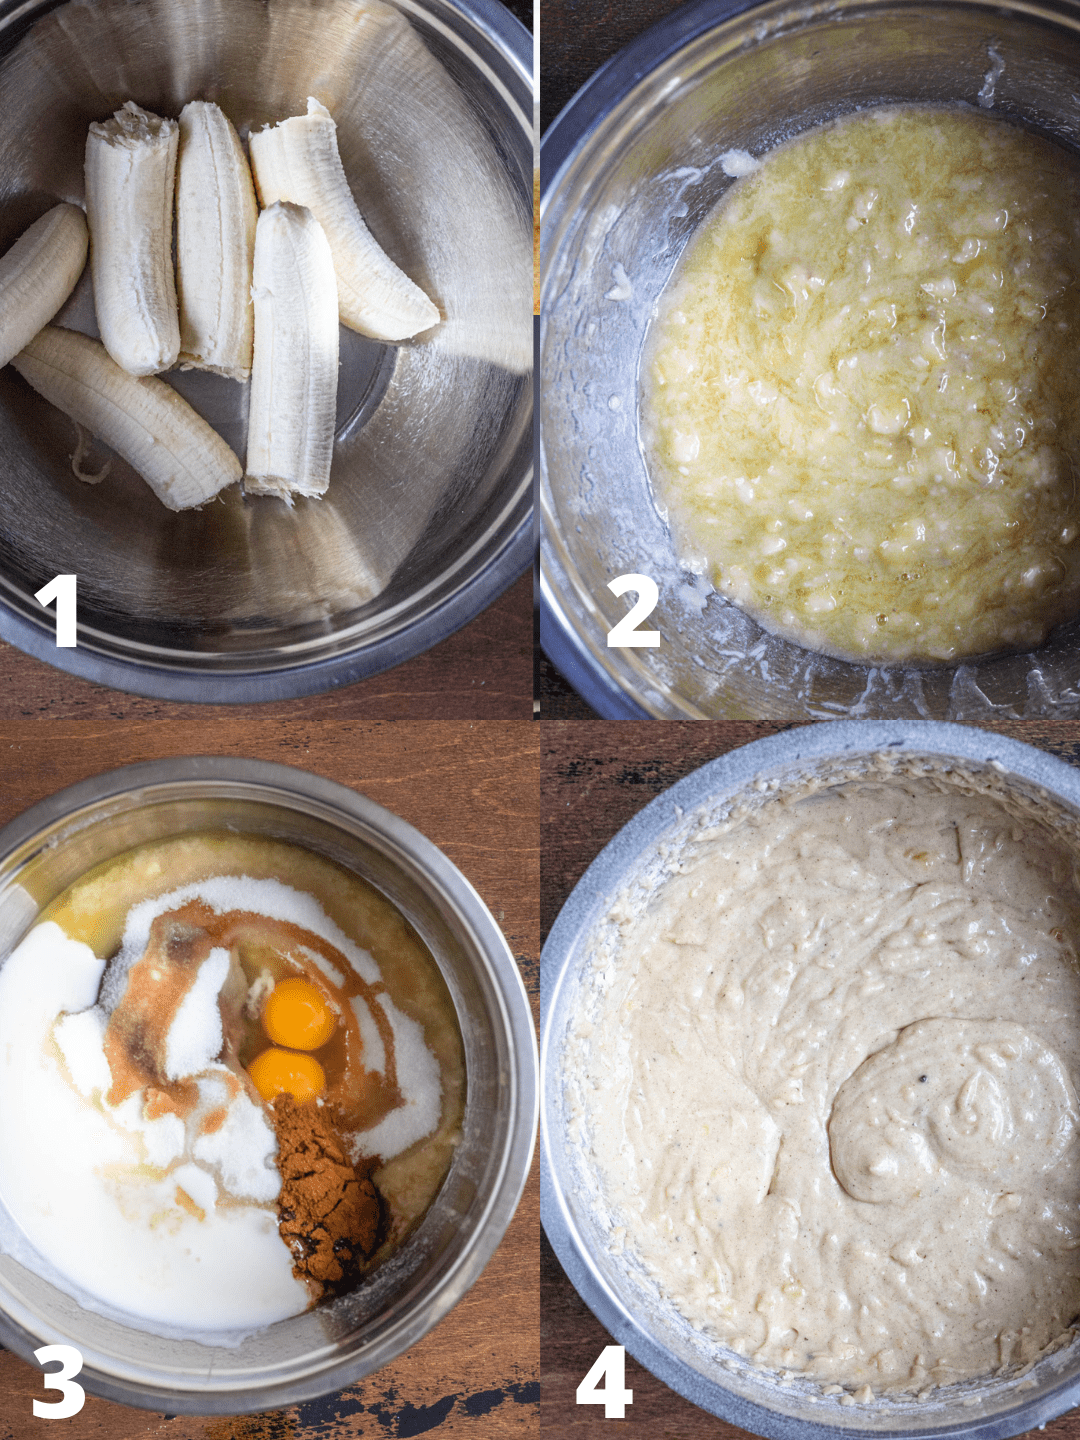 Collage of 4 pictures showing the steps to making a banana cake. 